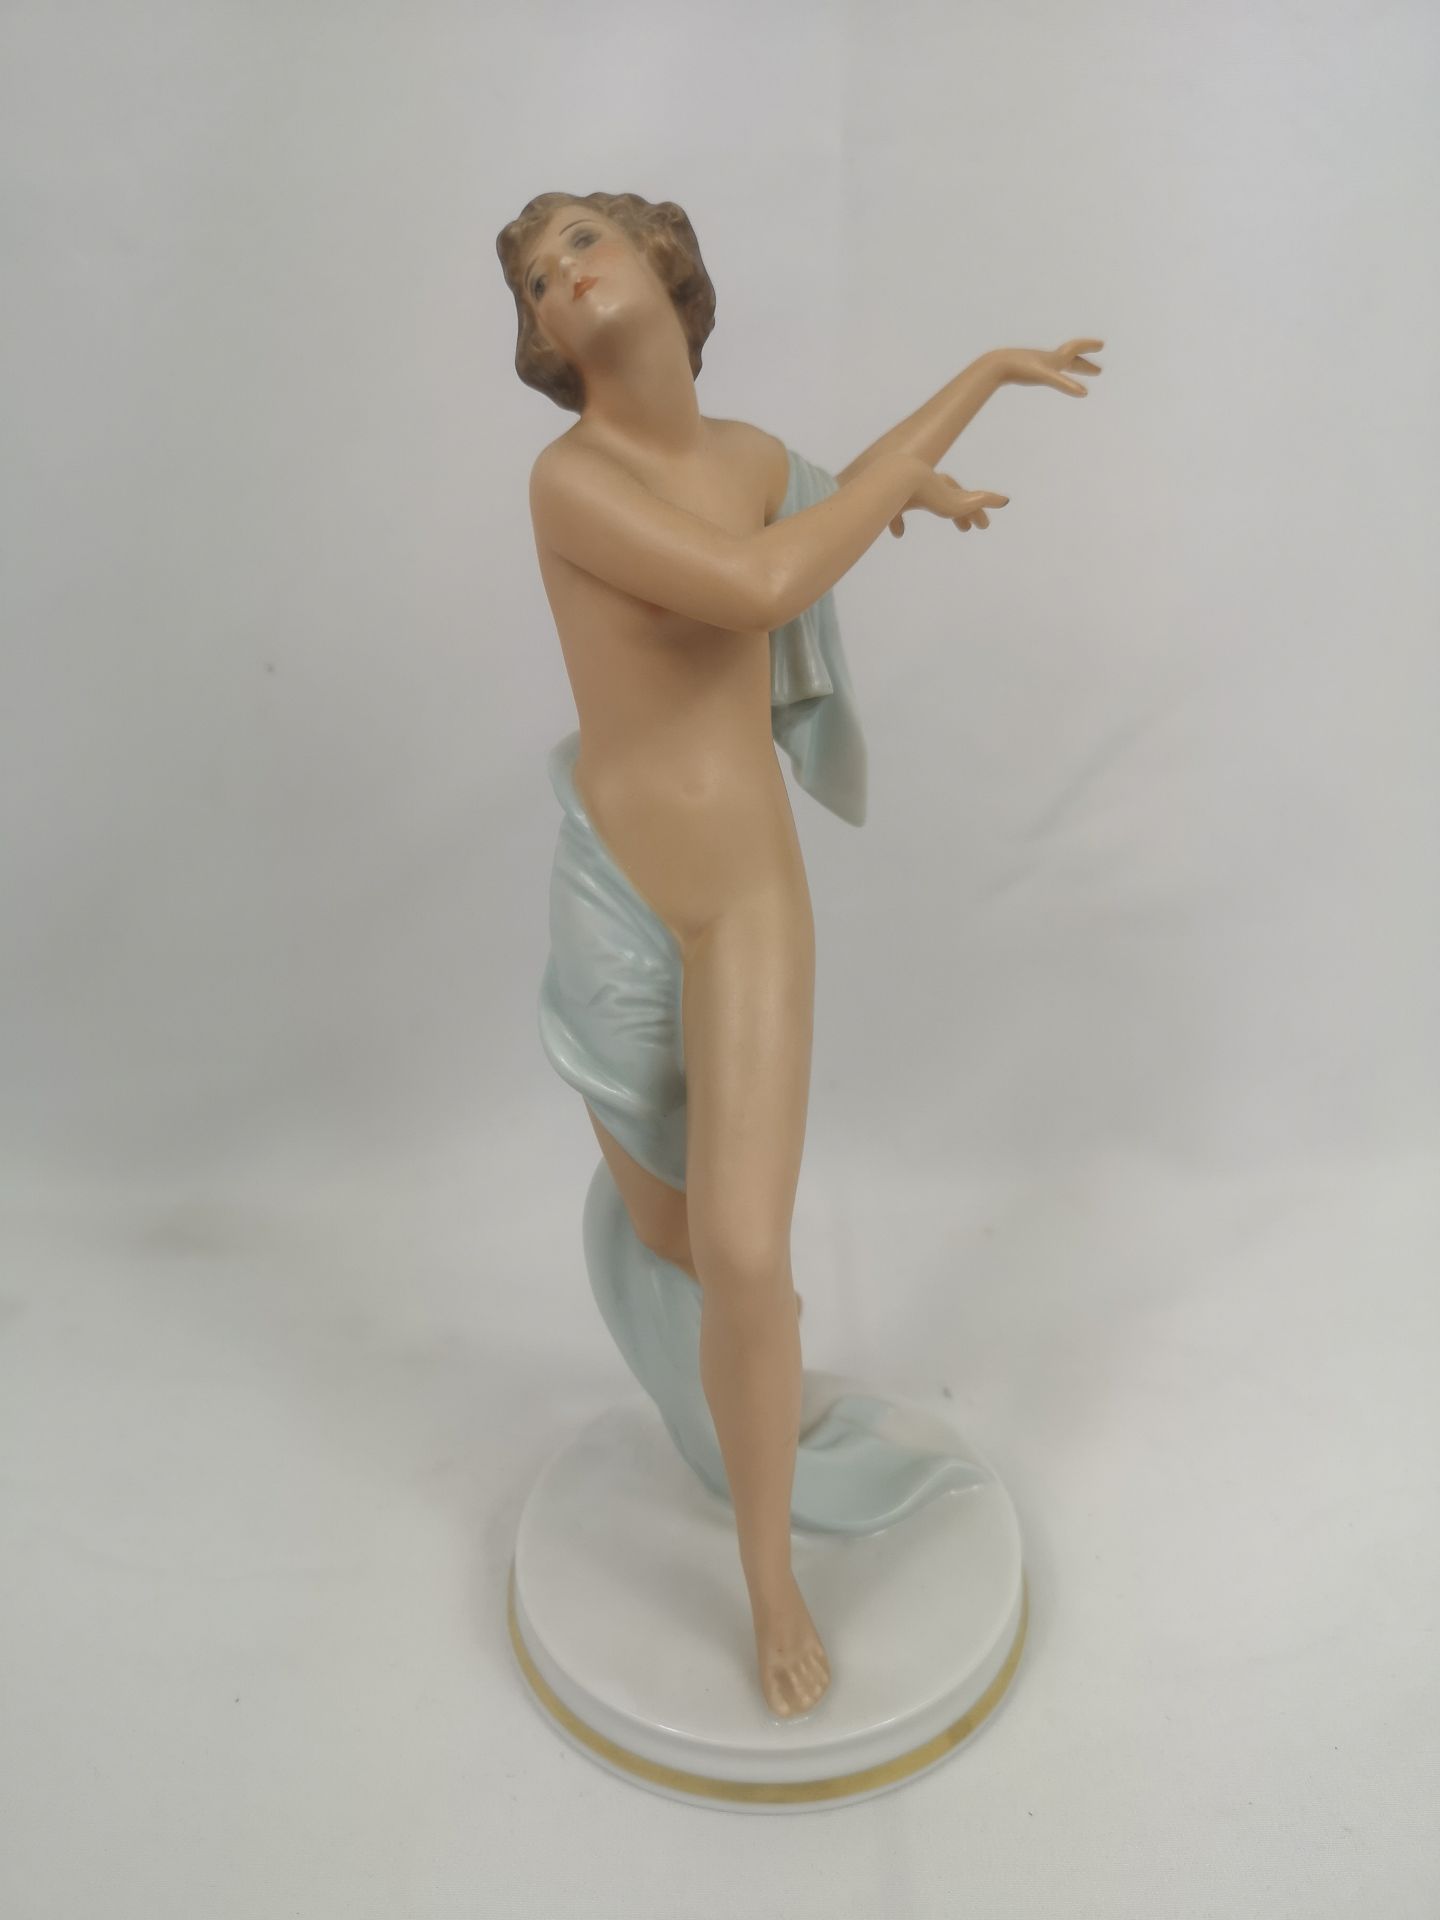 Art deco style Rosenthal figurine together with a Goldscheider figurine - Image 5 of 6